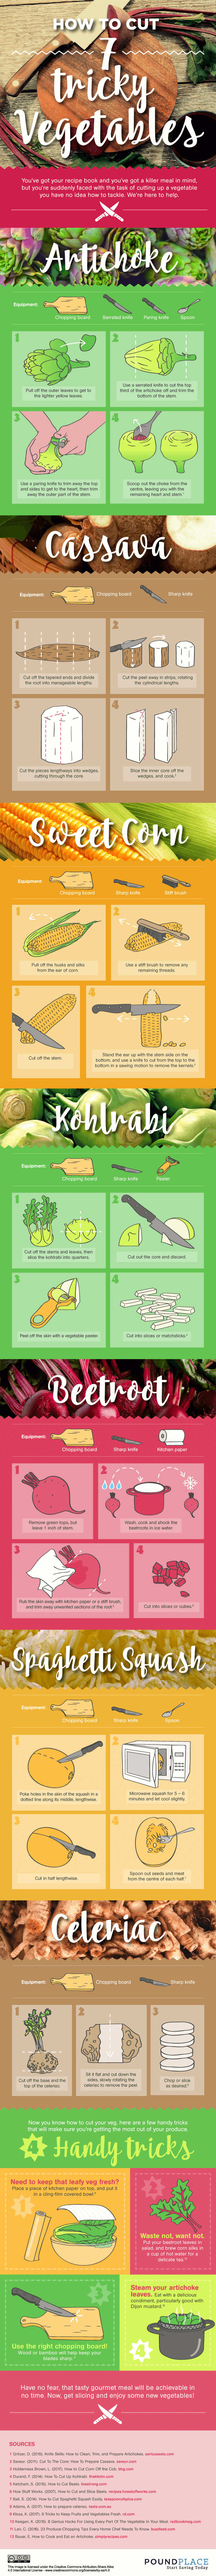 The Best Chopping Methods For Seven Weirdly-Shaped Vegetables [Infographic]